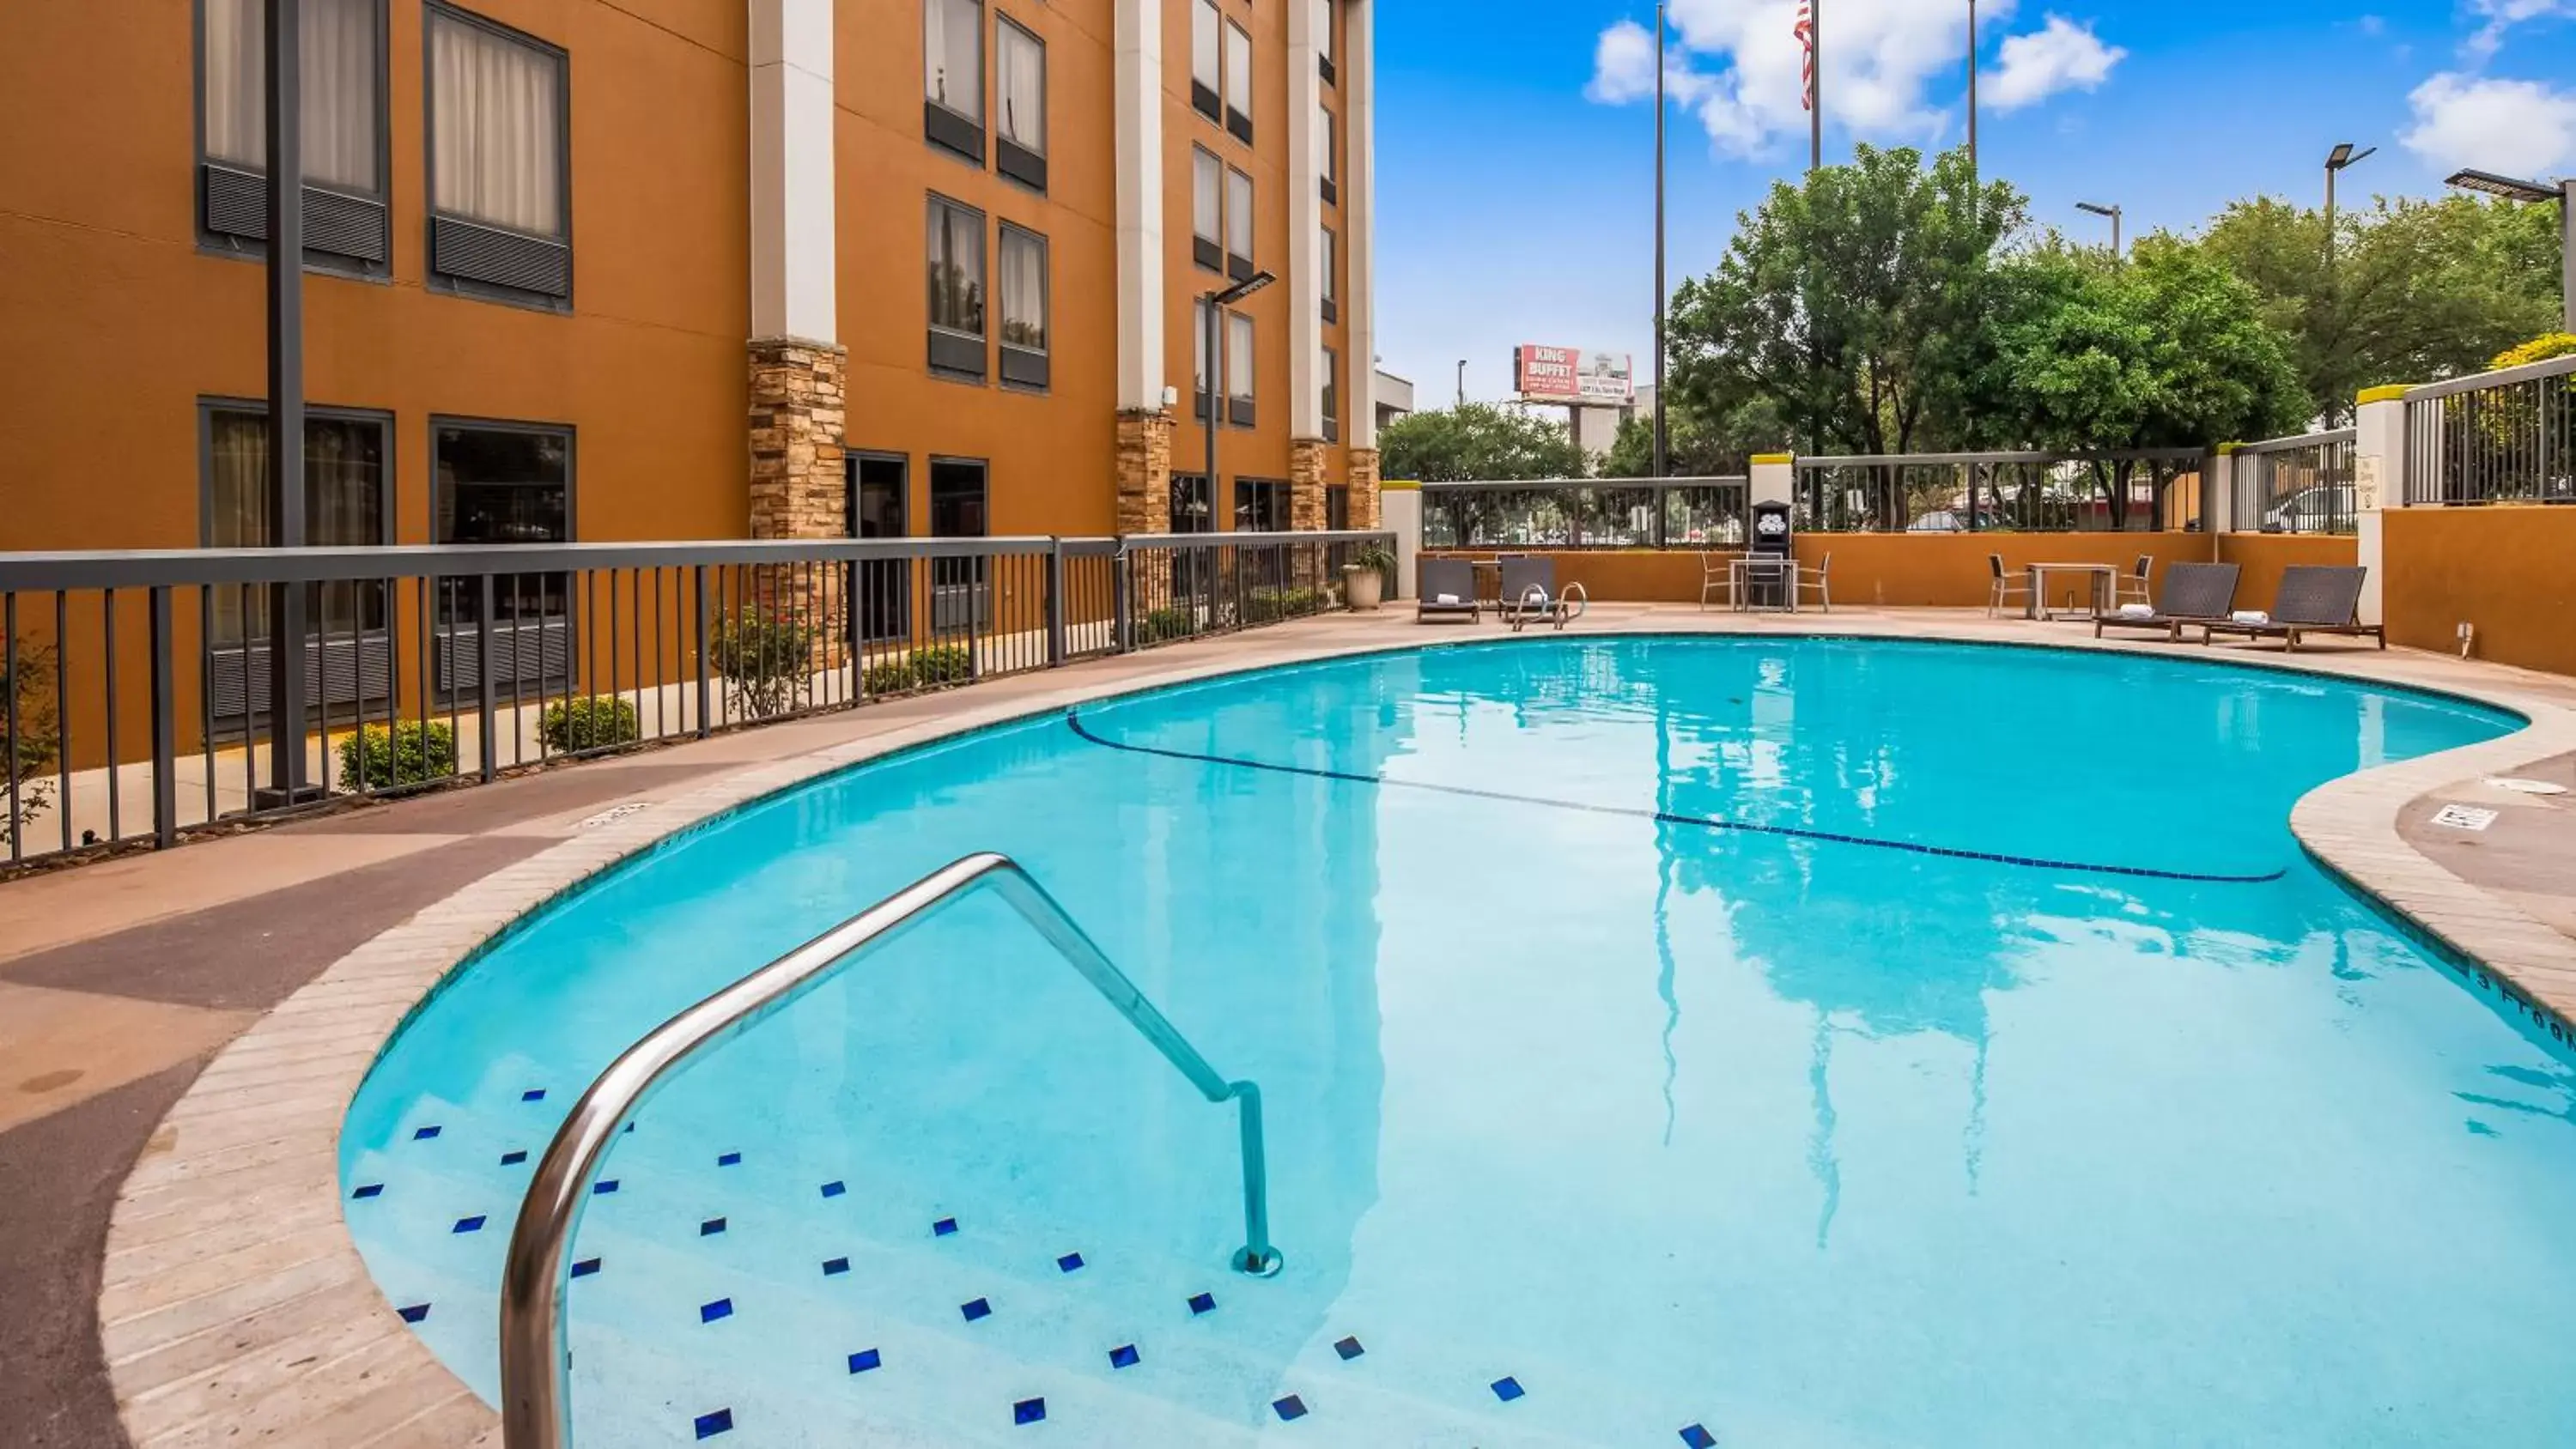 Swimming Pool in Clarion Pointe near Medical Center